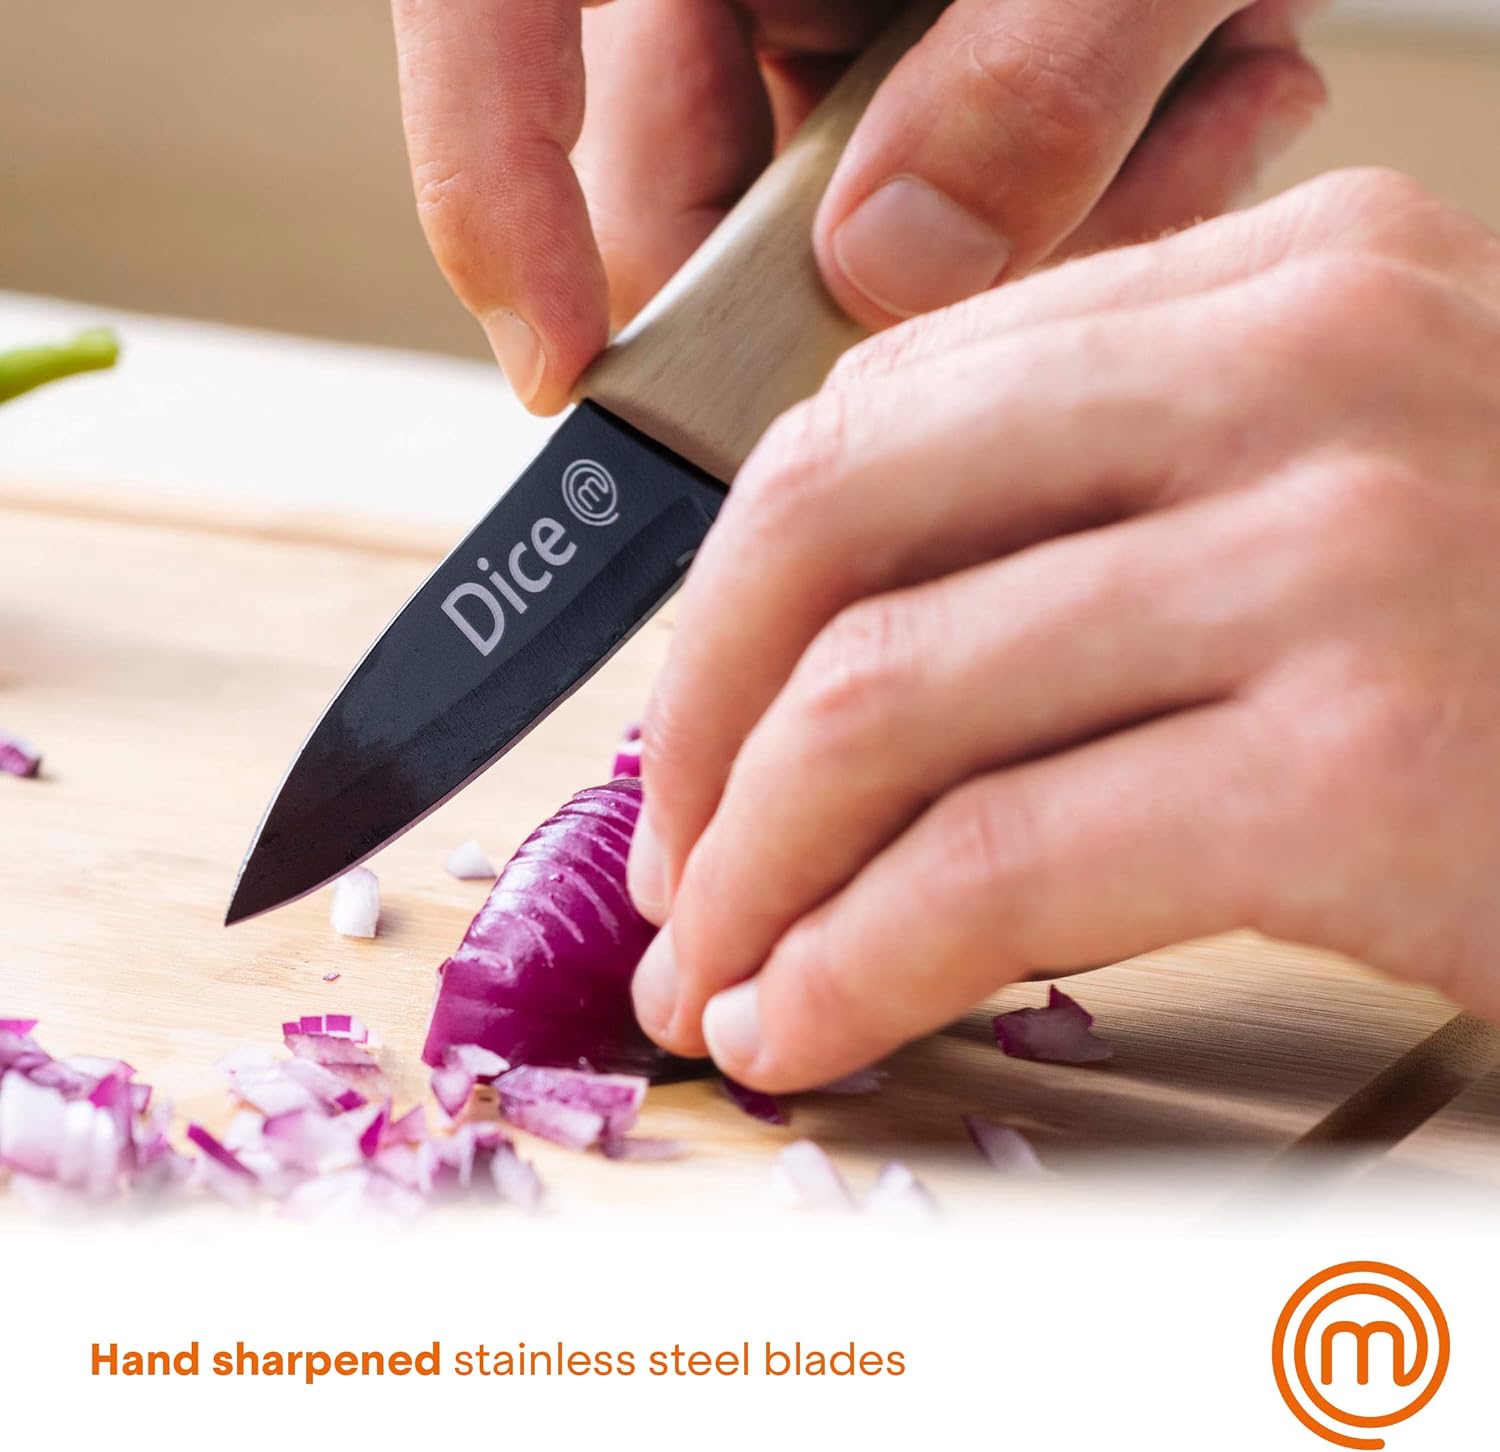 MasterChef Knife Kitchen Knives for Cooking, 24 Packs of 3